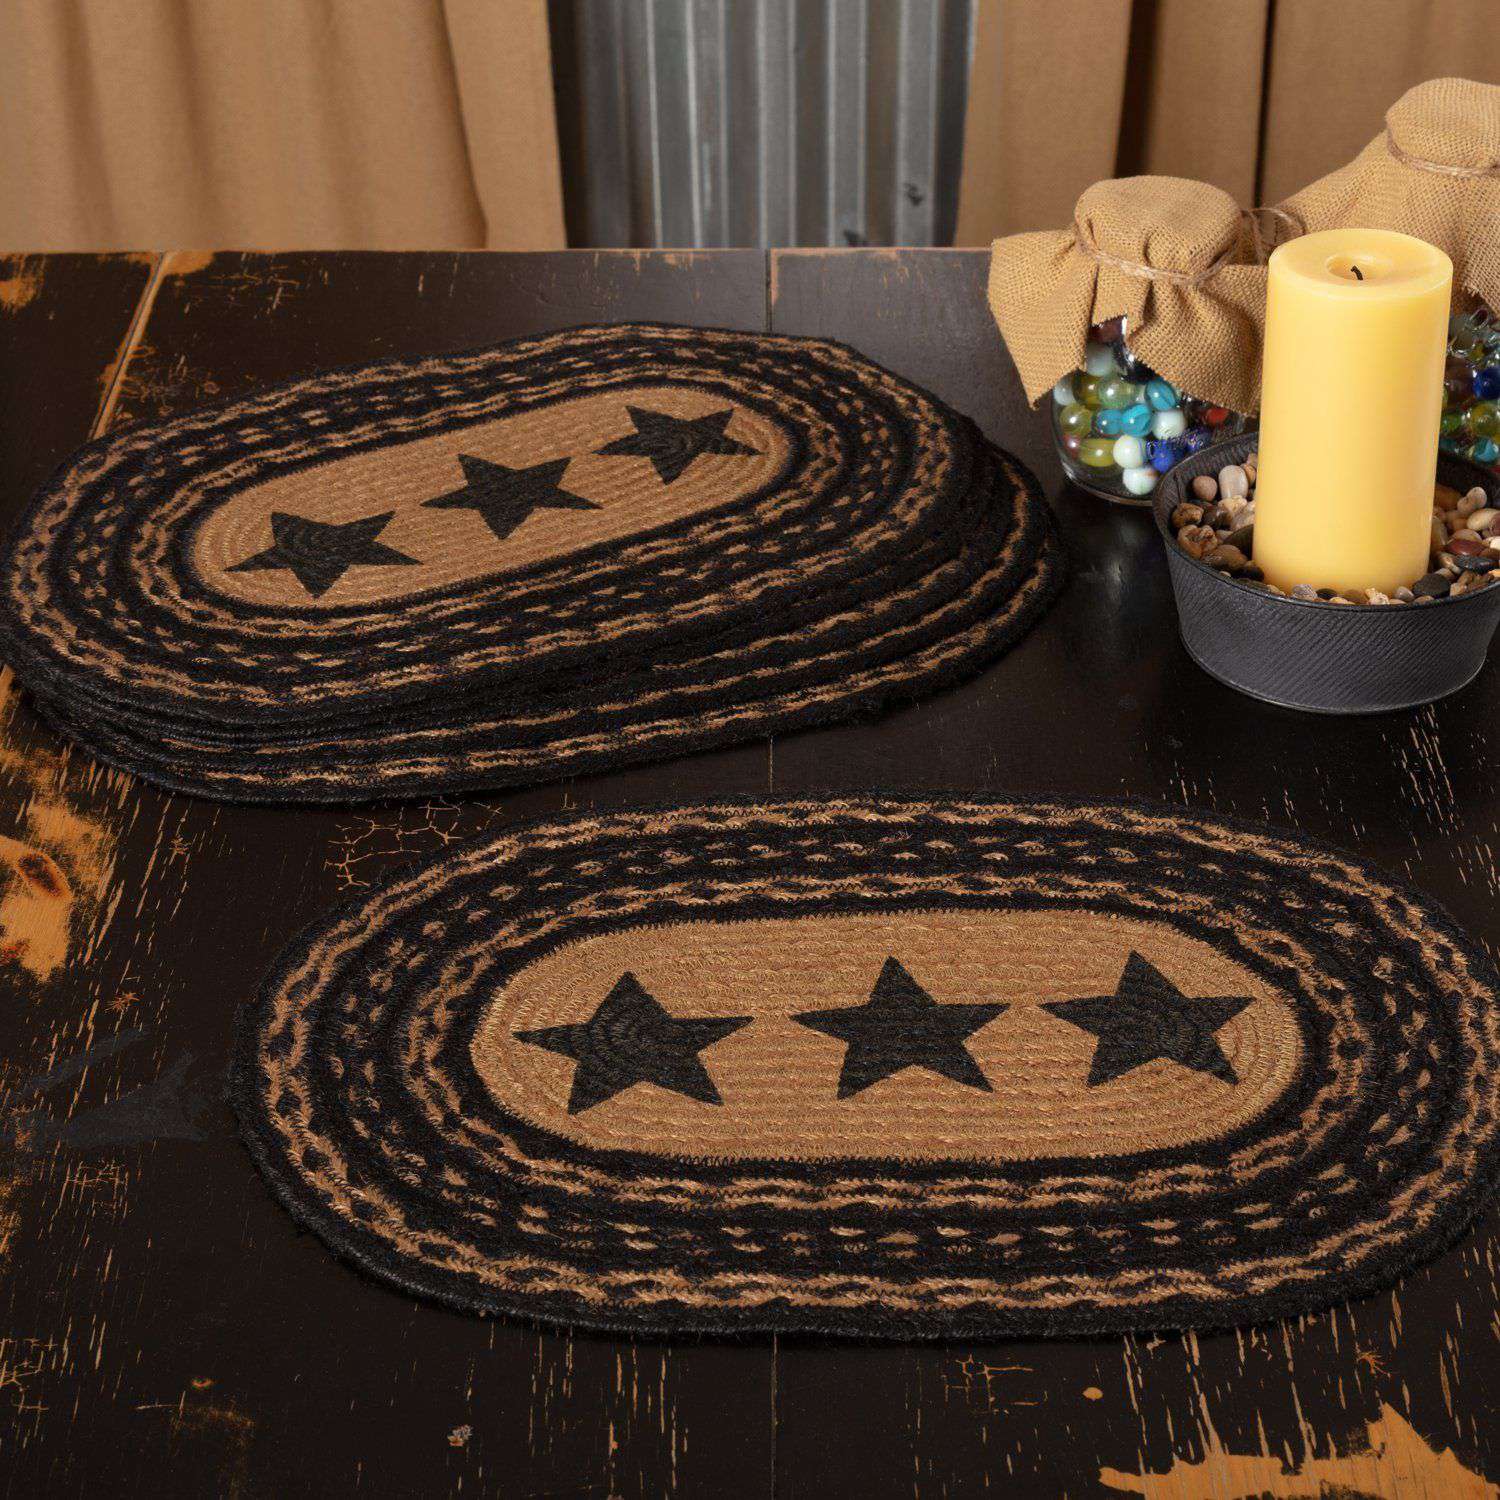 Farmhouse Jute Braided Placemats Stencil Stars Set of 6 table mats VHC Brands 